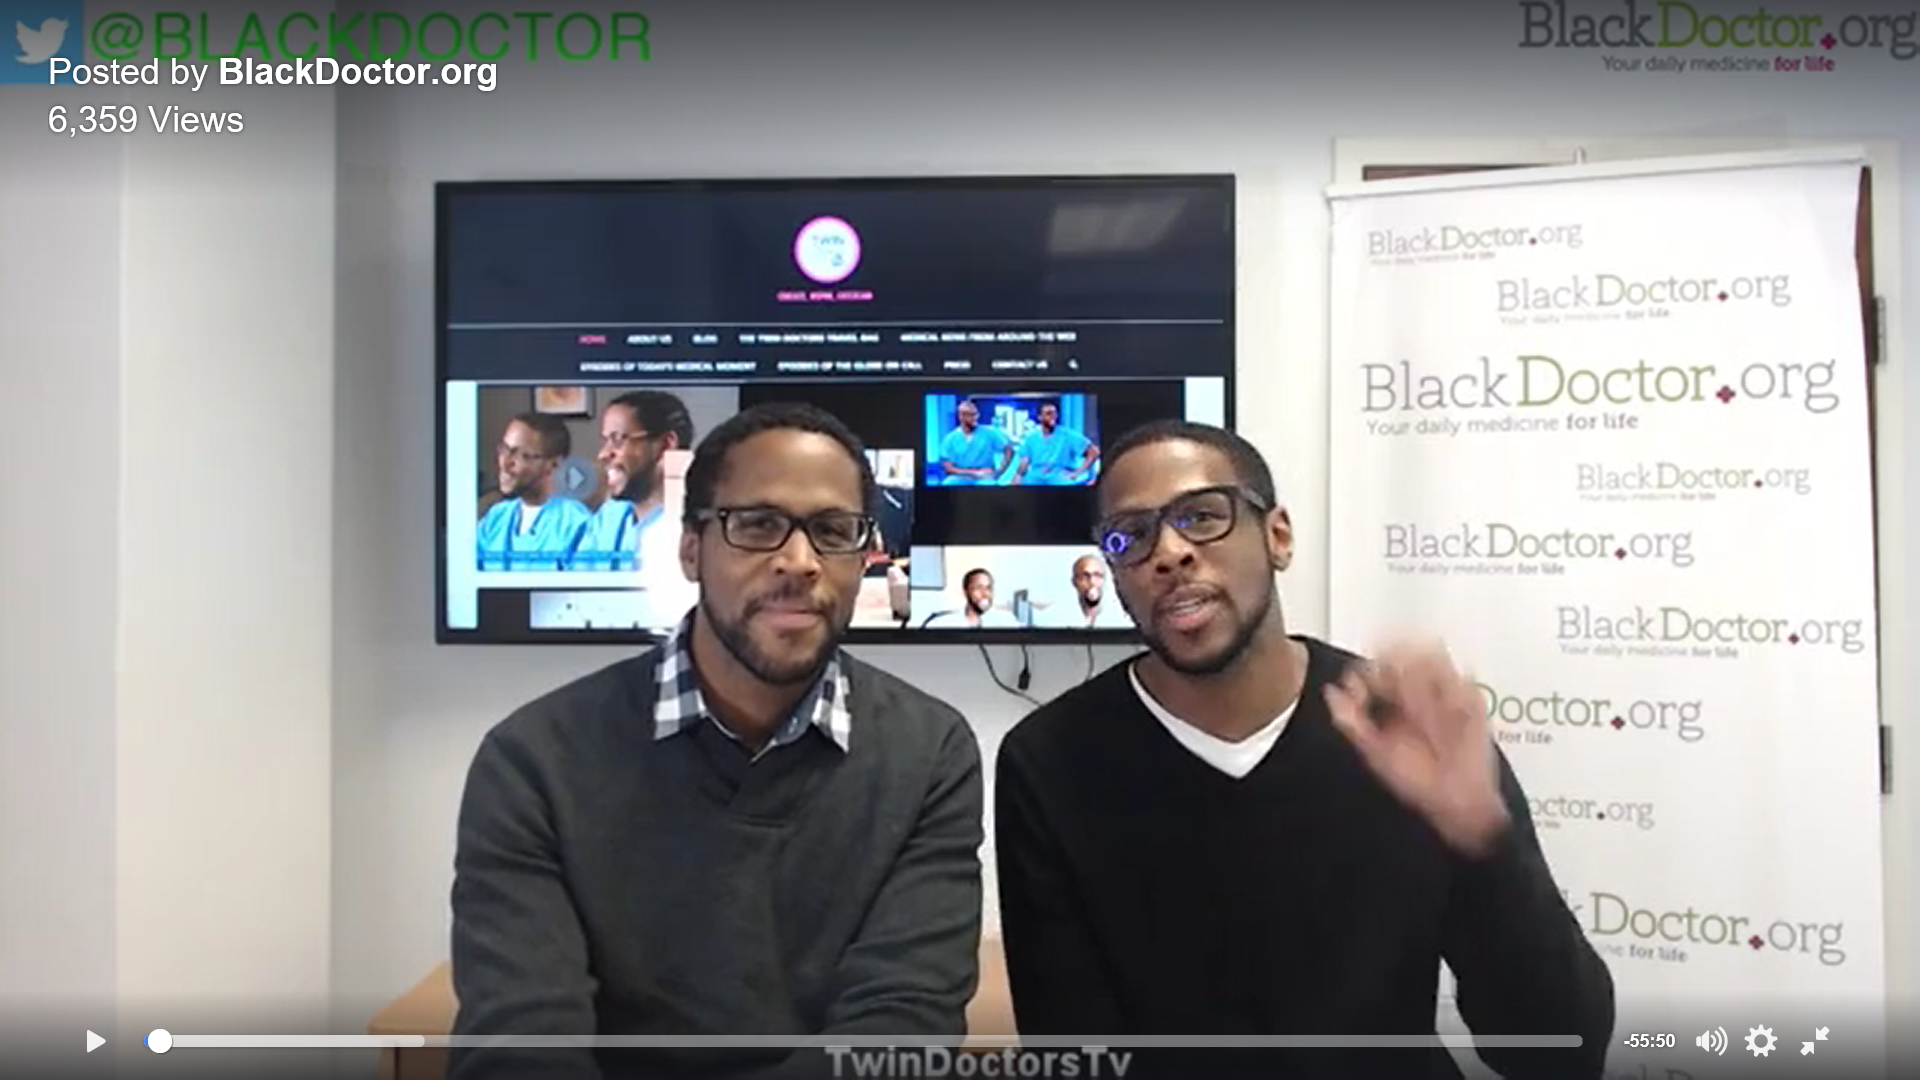 Facebook Live Medical Q&A with blackdoctor.org and Twin Doctors TV